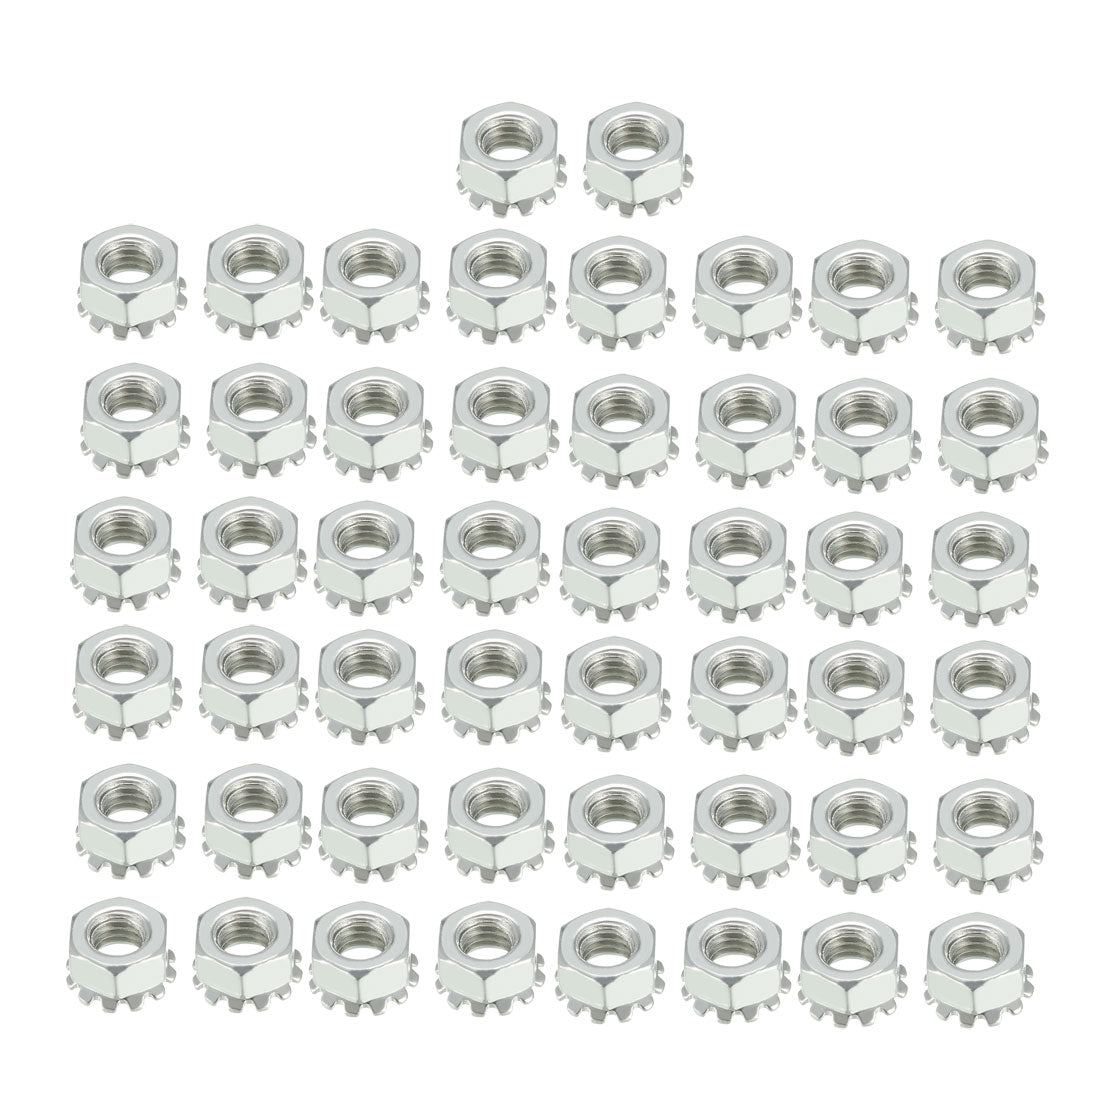 uxcell Uxcell Carbon Steel Female Thread Kep Hex Head Lock Nut 50pcs